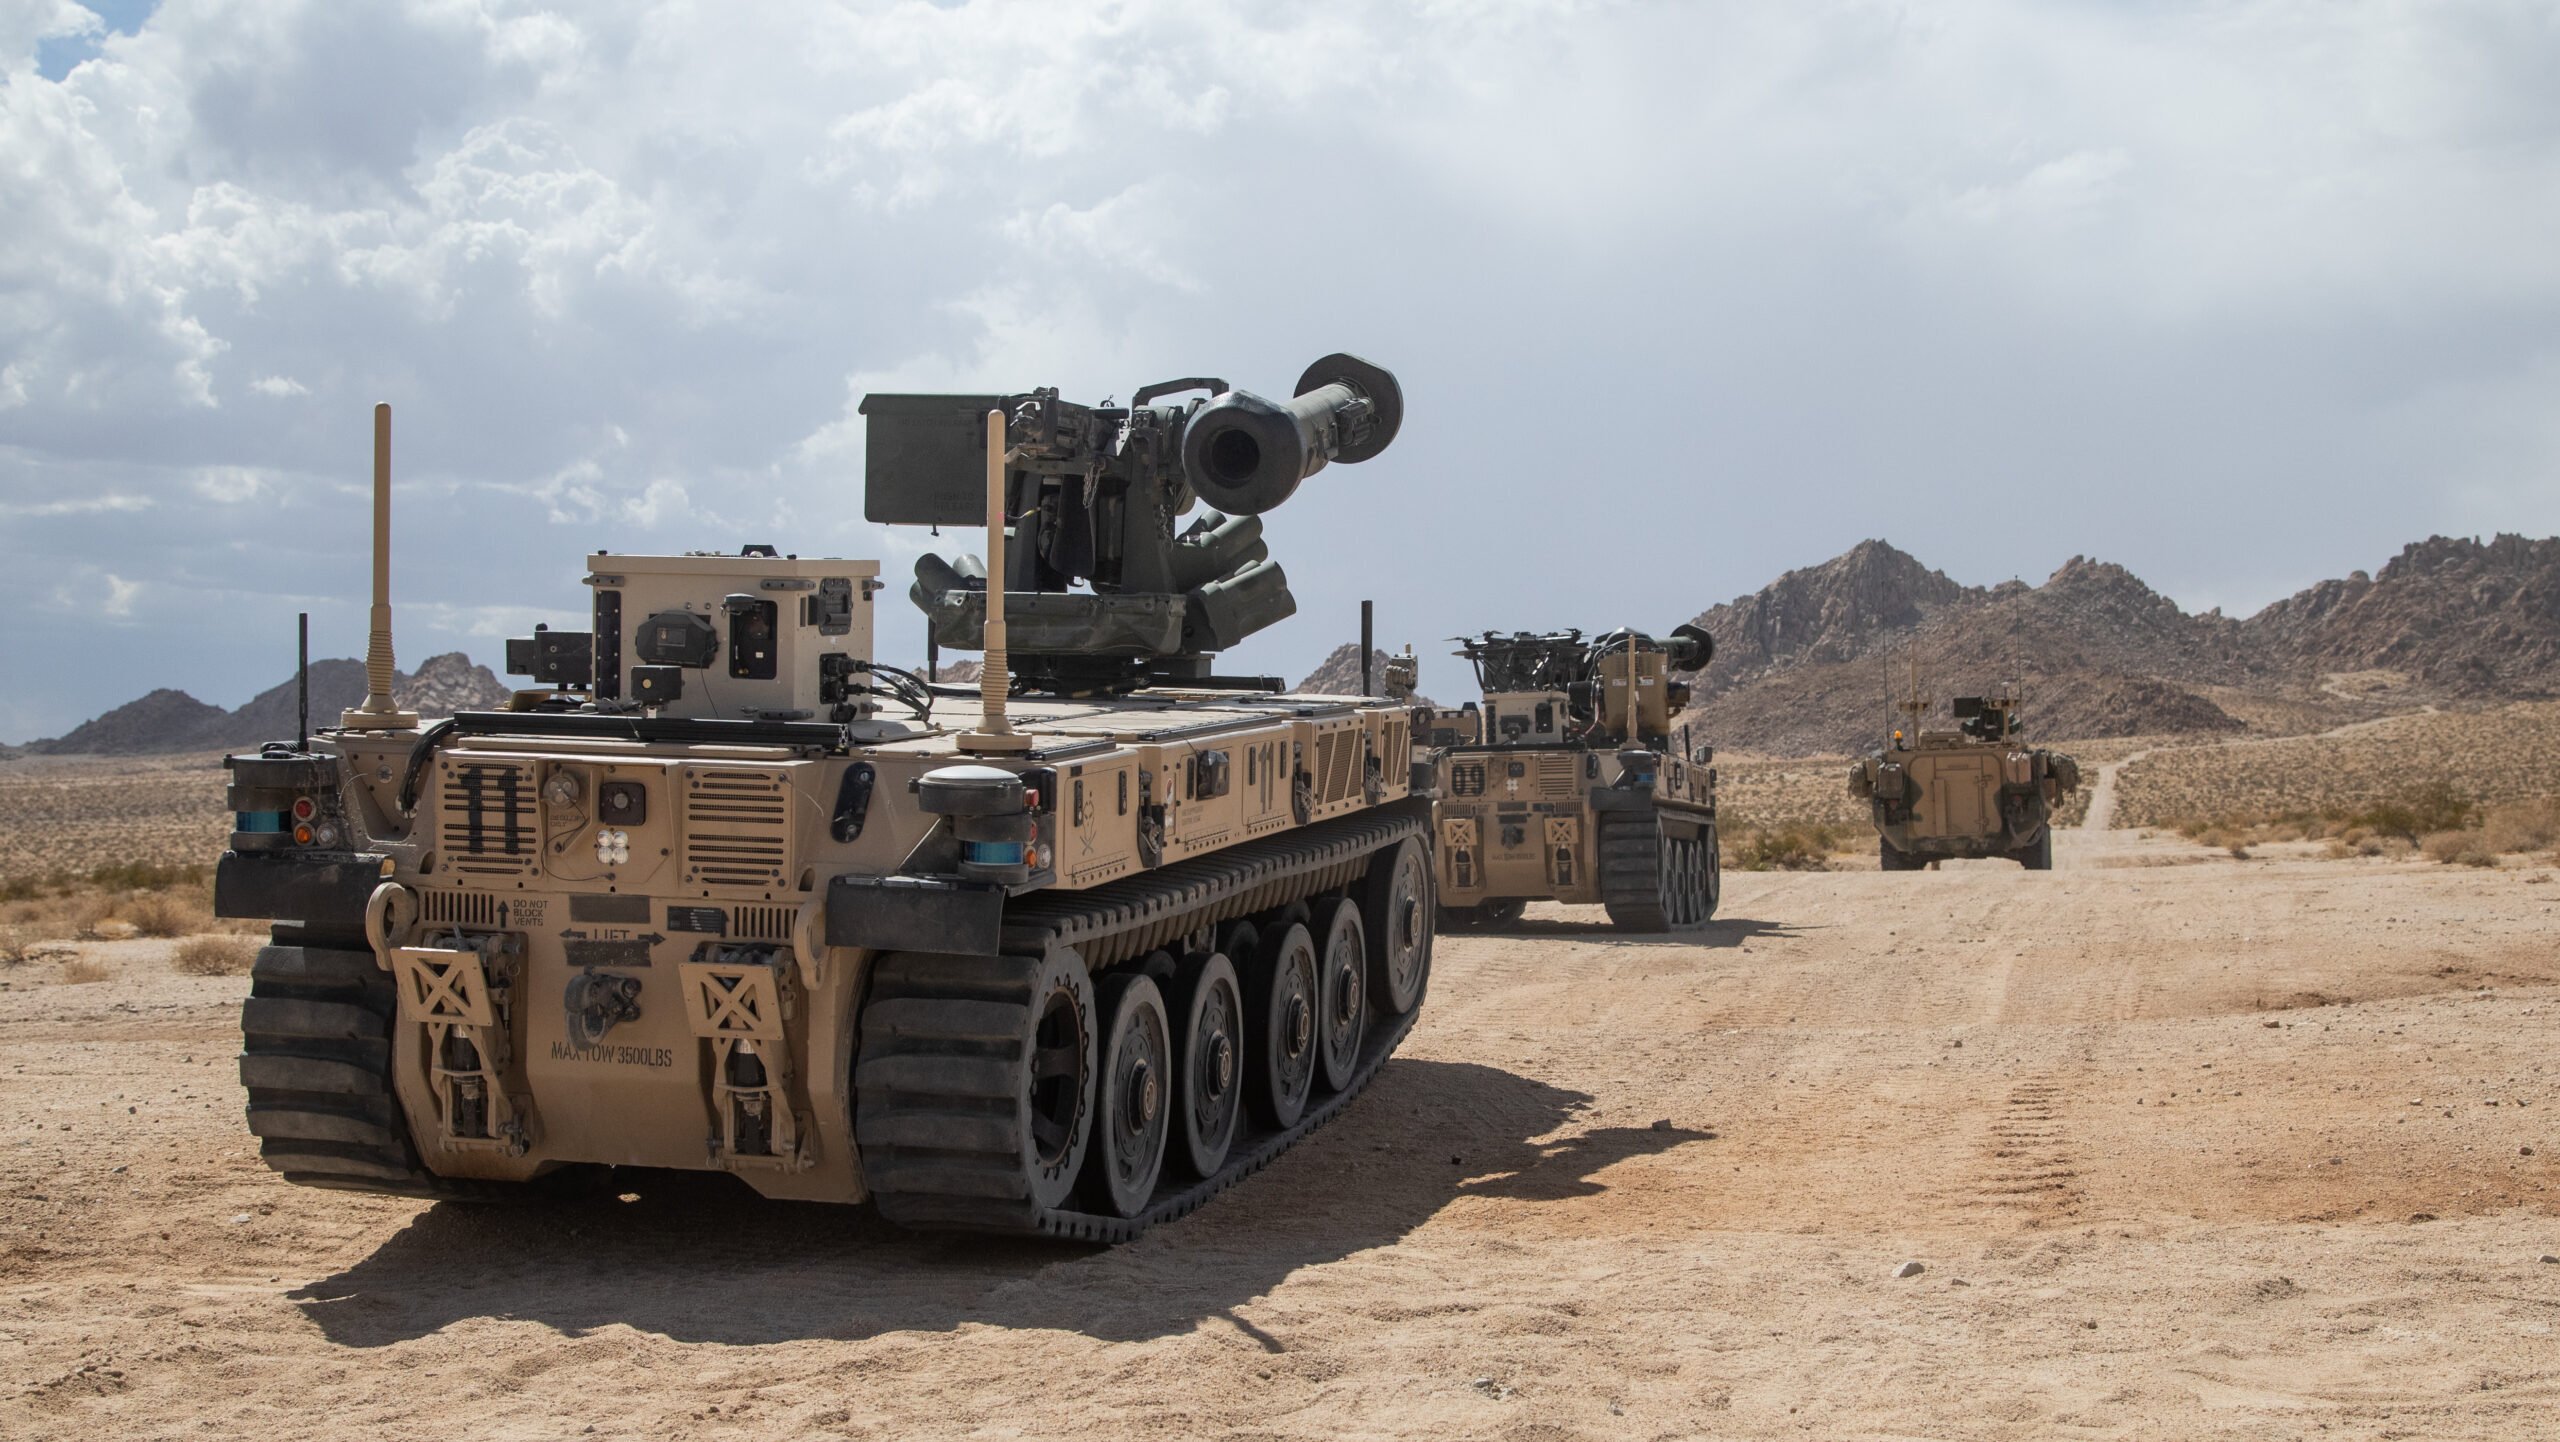 Robotic moves: Army picks 8 tech companies to compete Robotic Combat Vehicle pieces